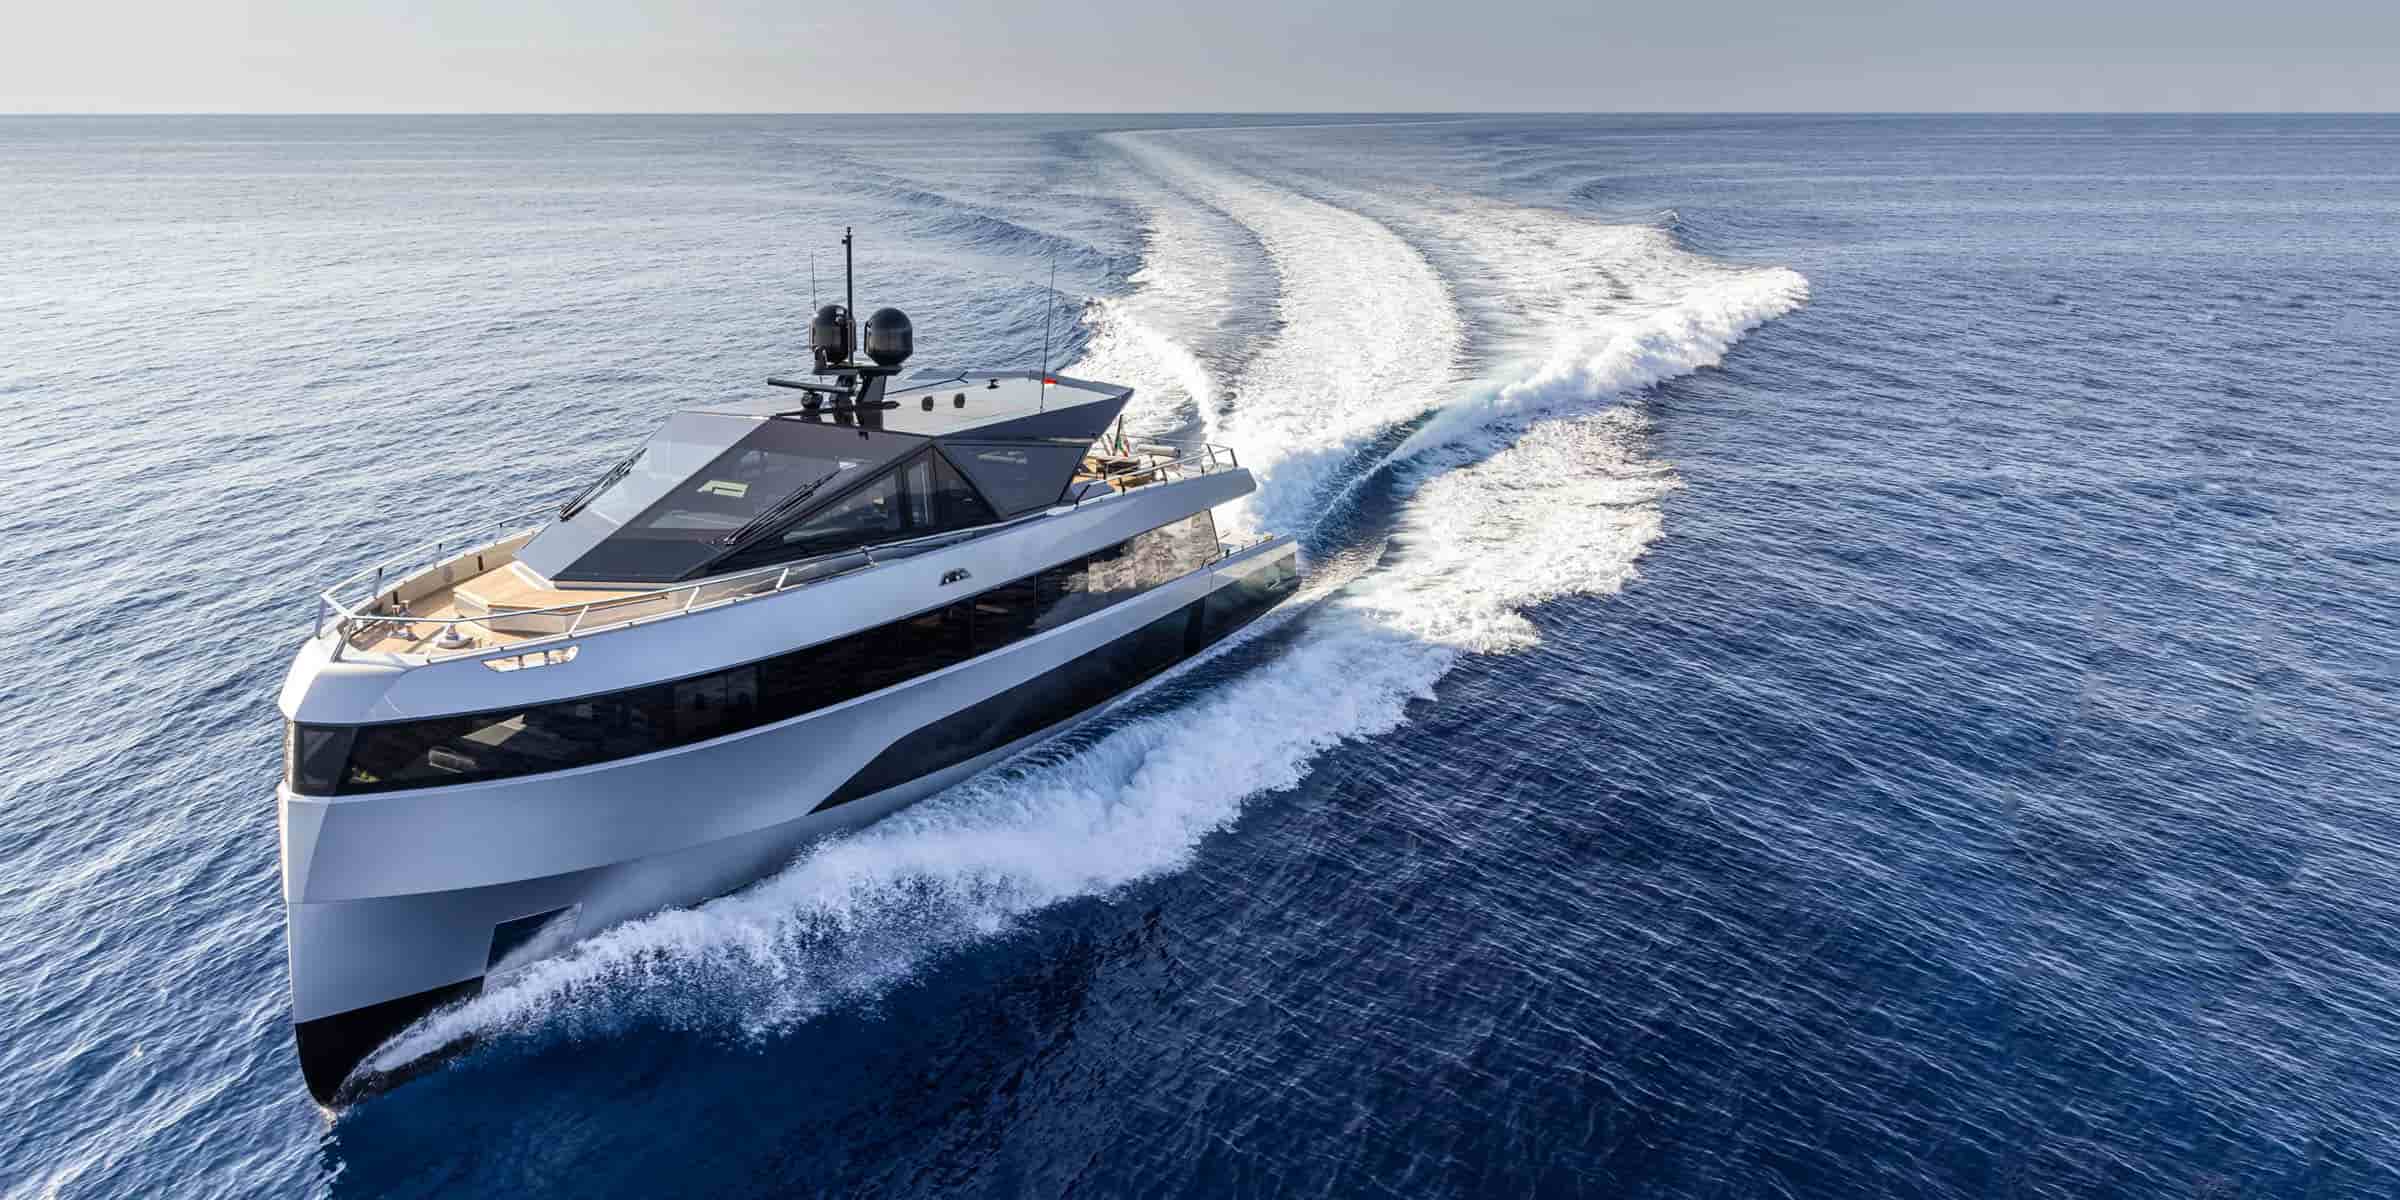 luxury yachts of the world